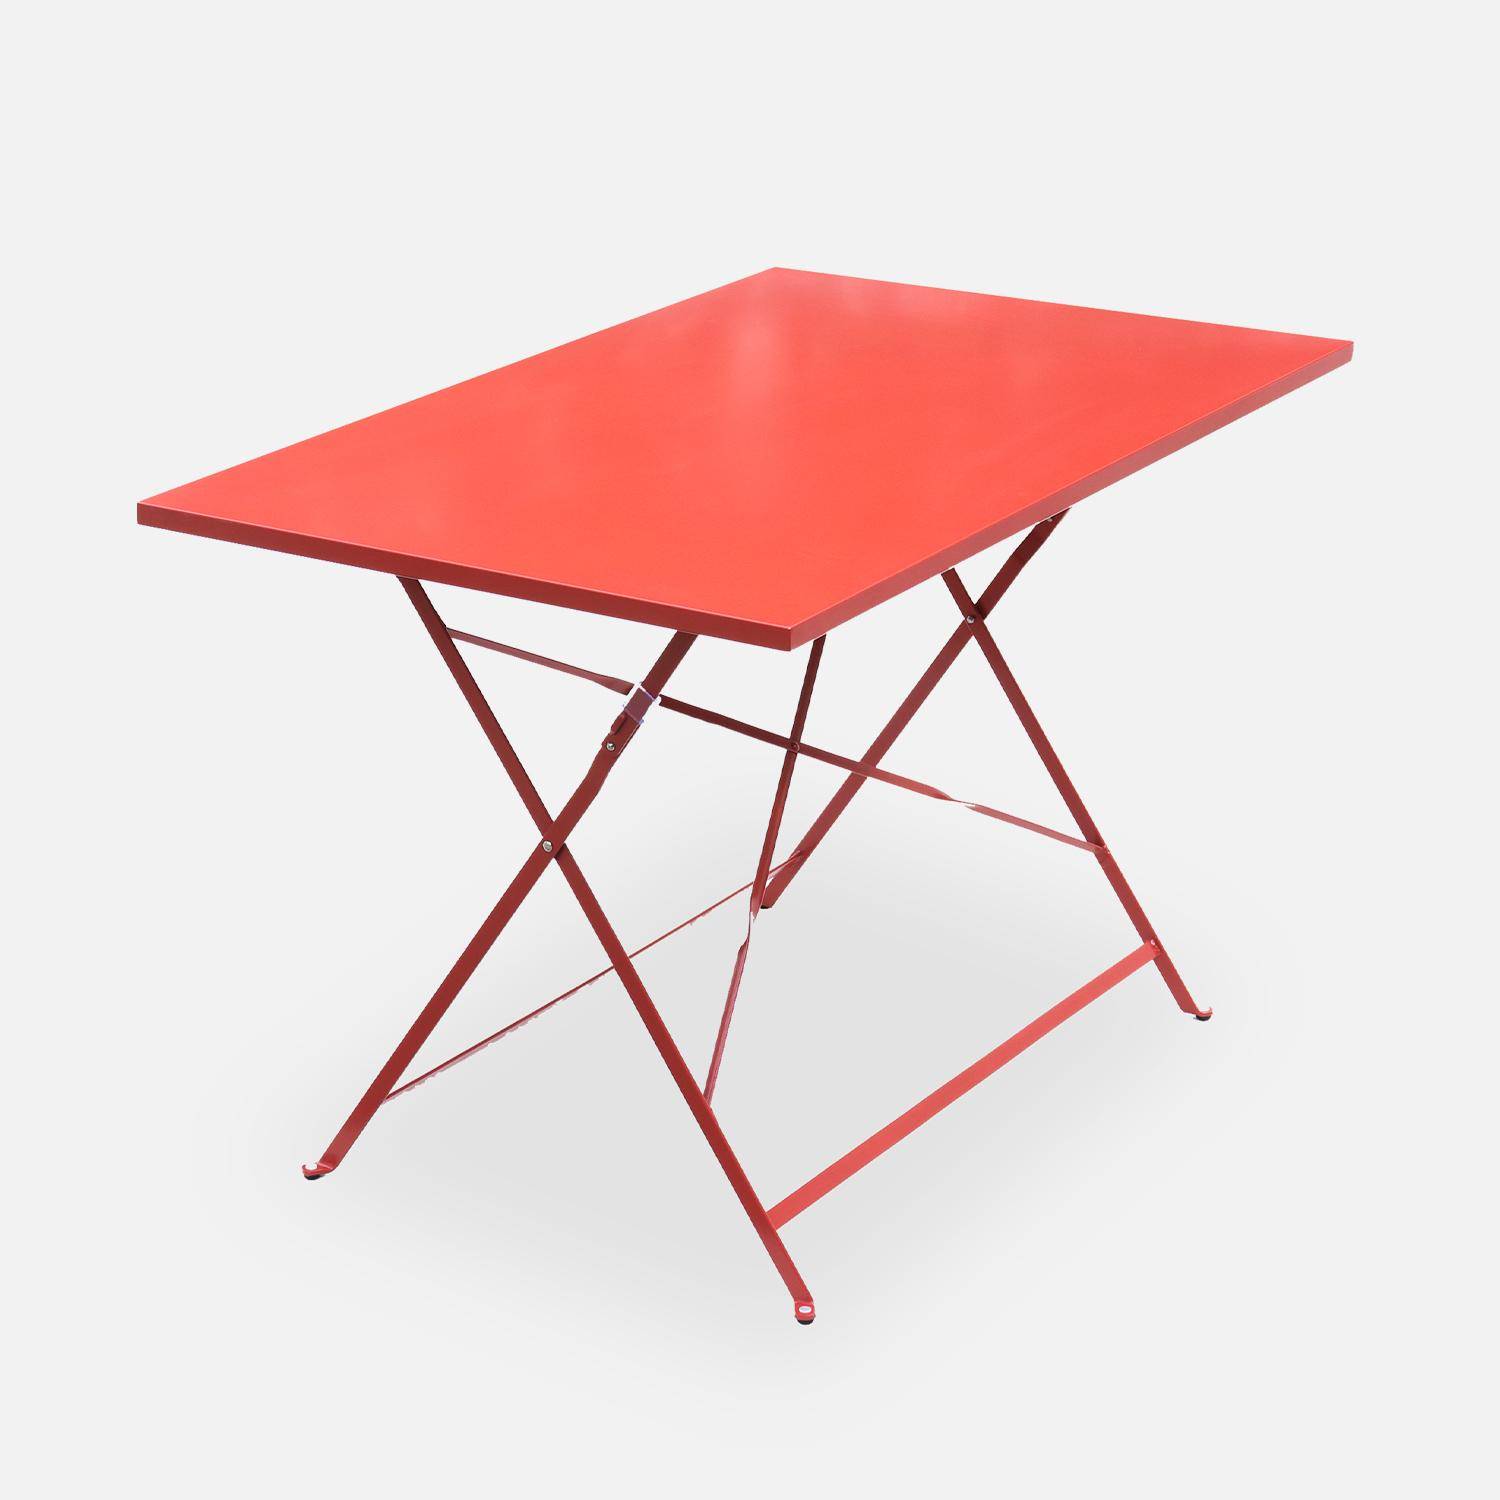 4-seater foldable thermo-lacquered steel bistro garden table with chairs, 110x70cm - Emilia - Terracotta Photo3